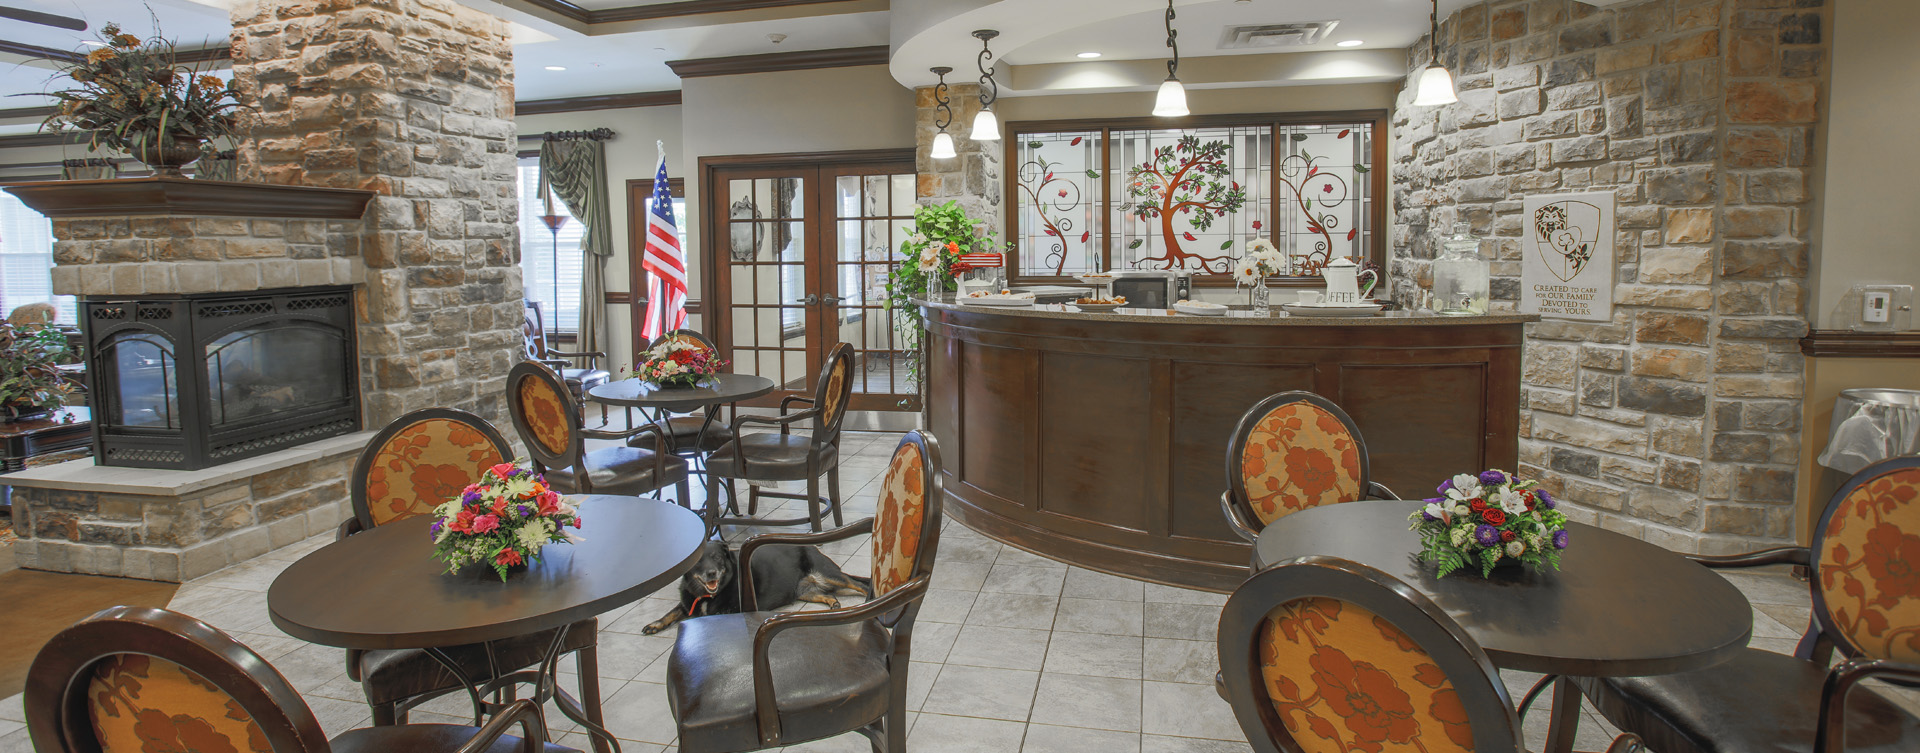 We’re serving up snacks, beverages and service around the clock in the bistro at Bickford of Carmel